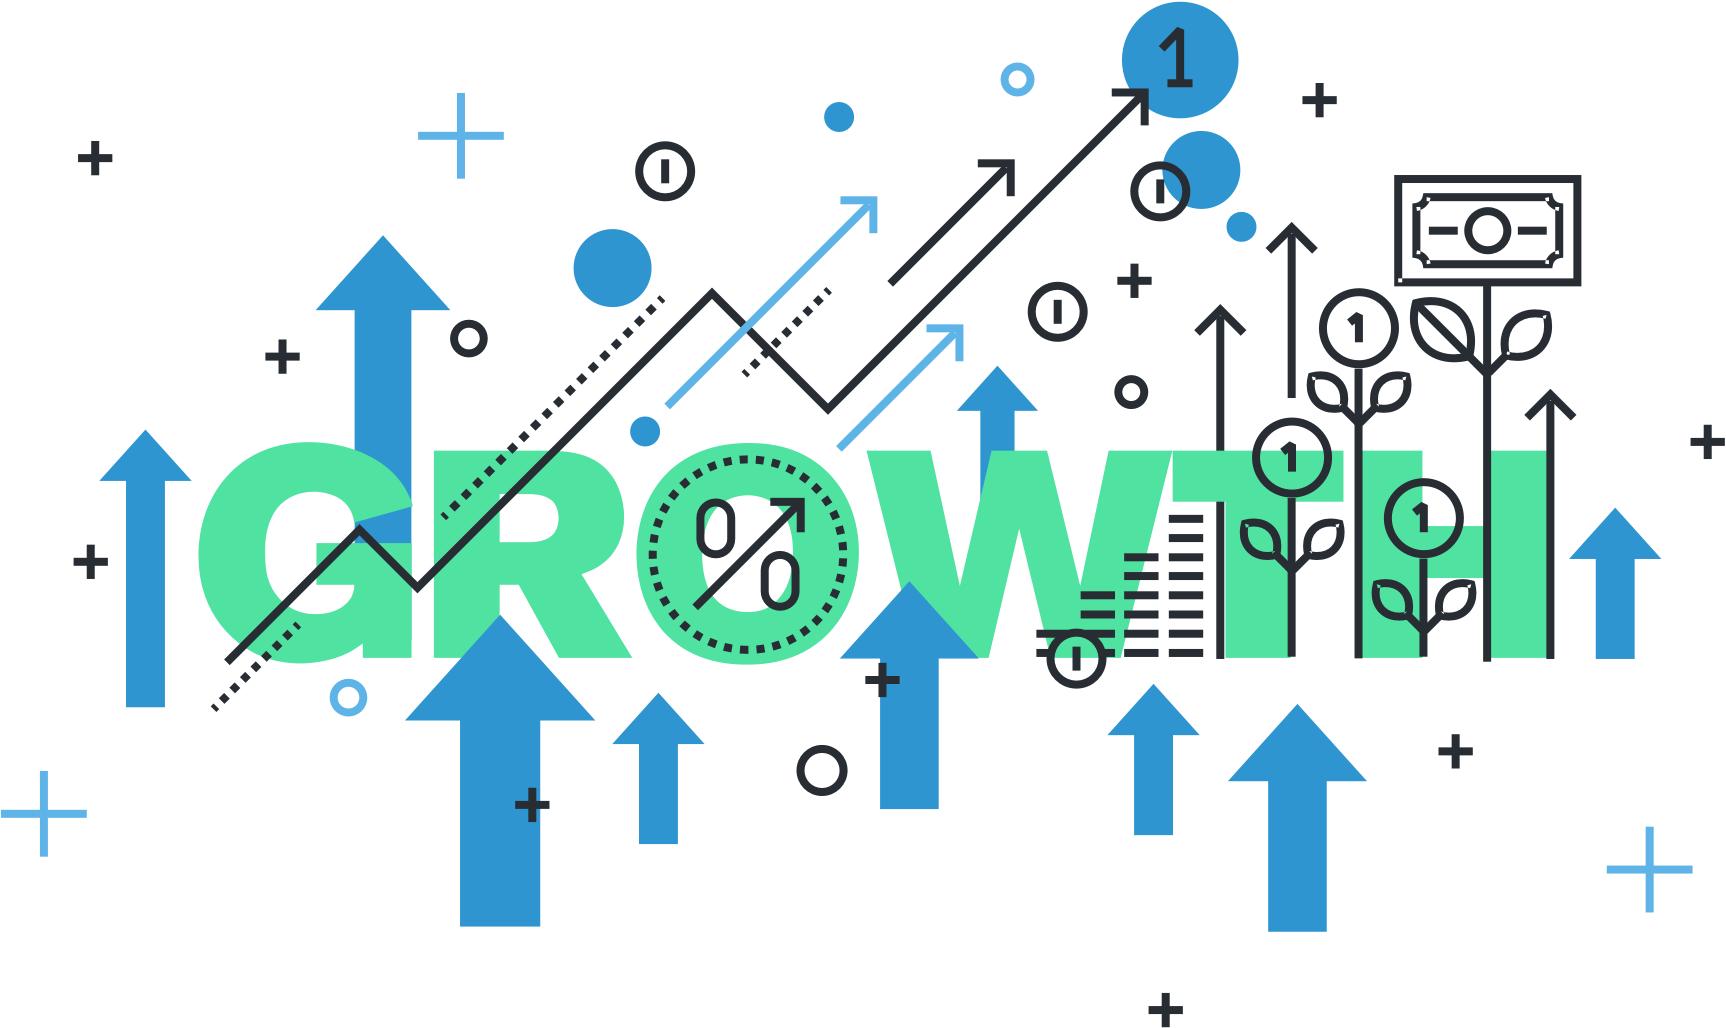 Growth illustration for small business growth through pay-per-click advertising.